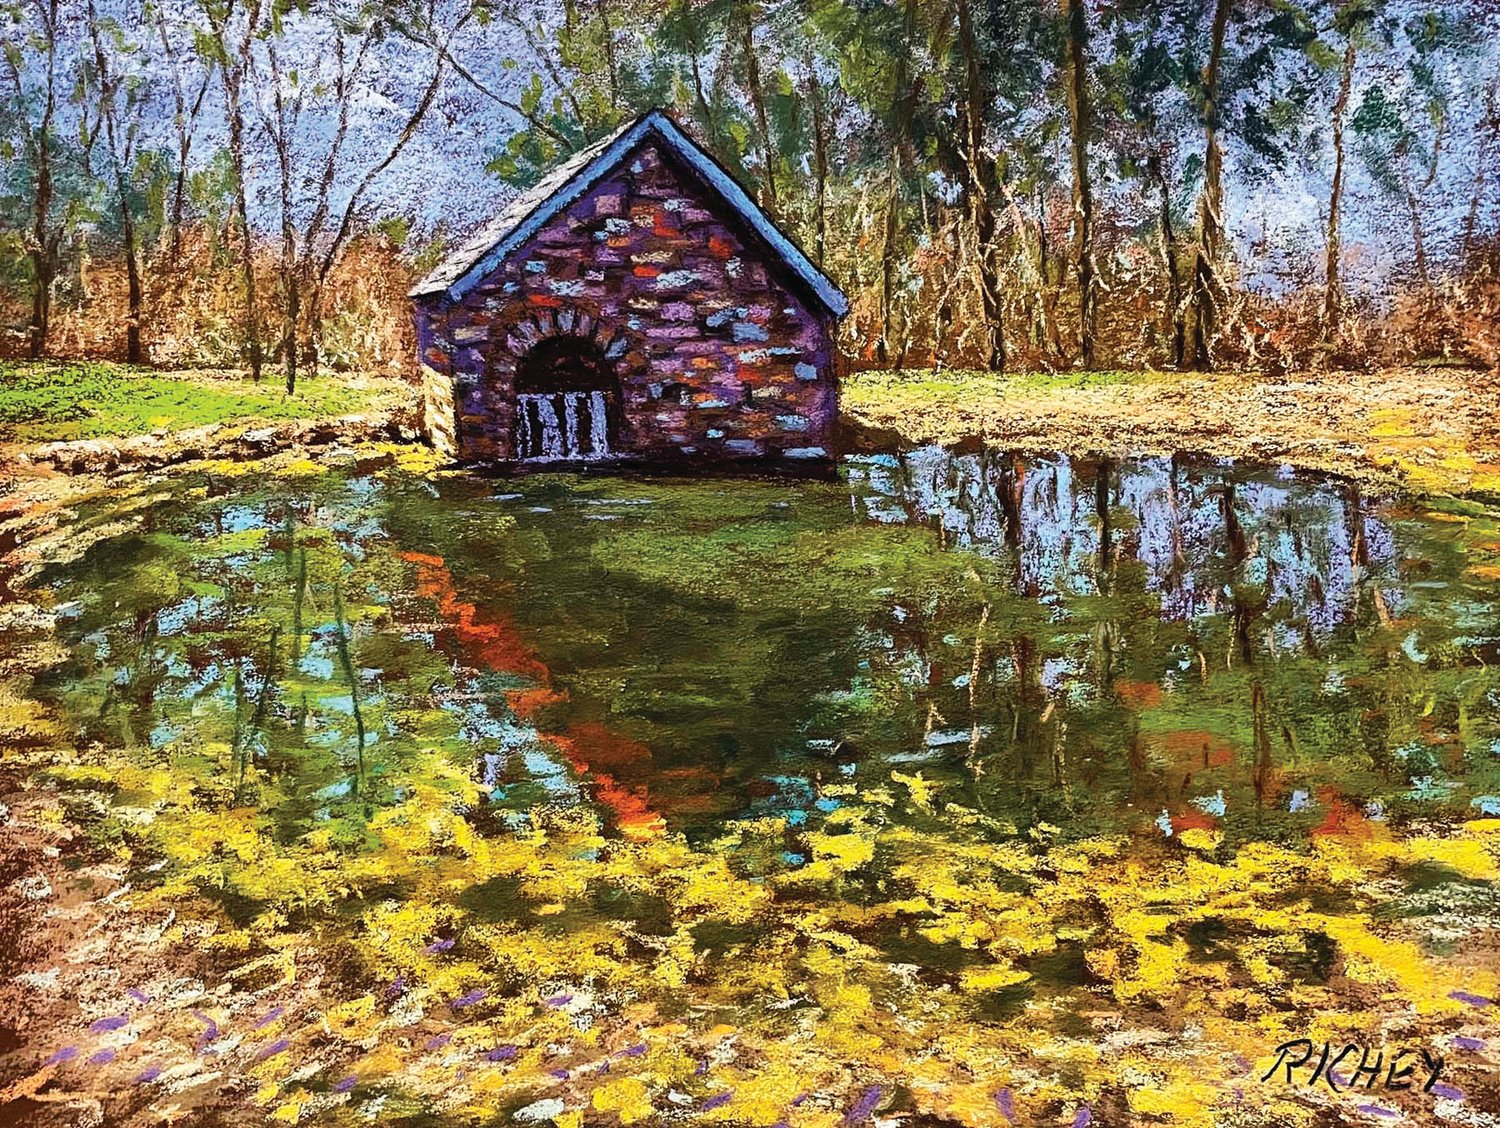 “Springhouse at Bowman’s Hill” is by Bob Richey.